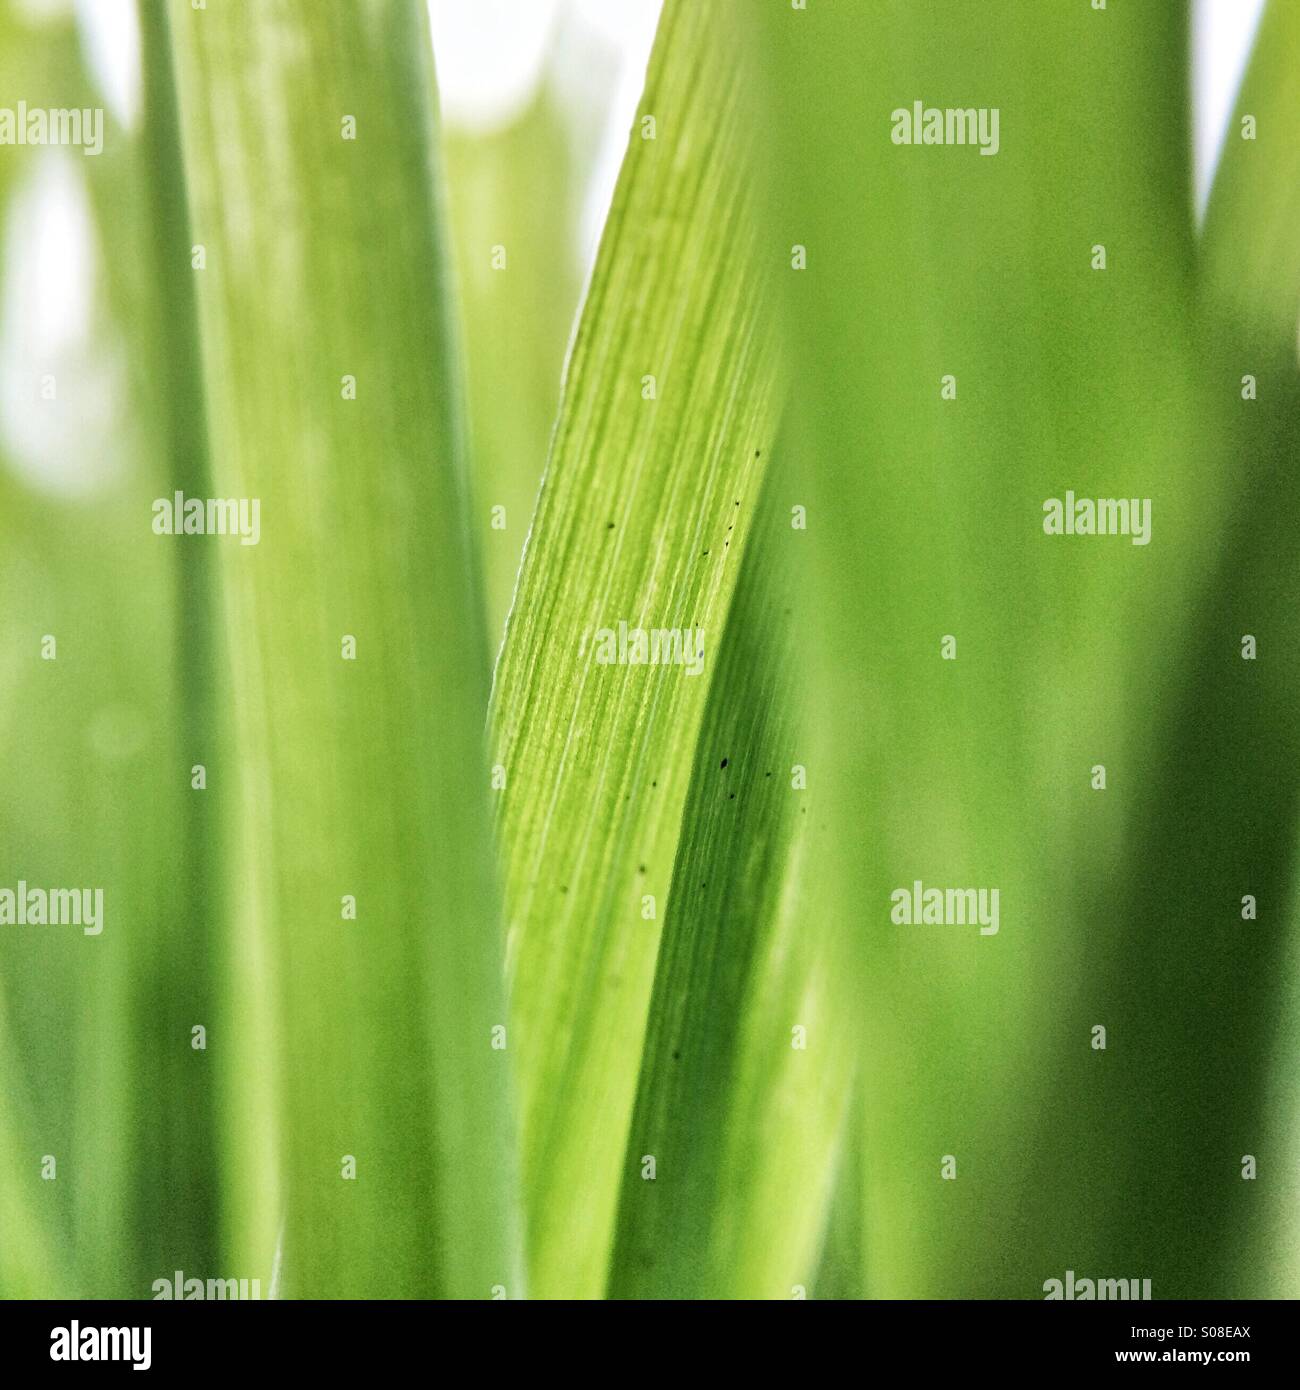 Strands of green grass lighted by the sun Stock Photo